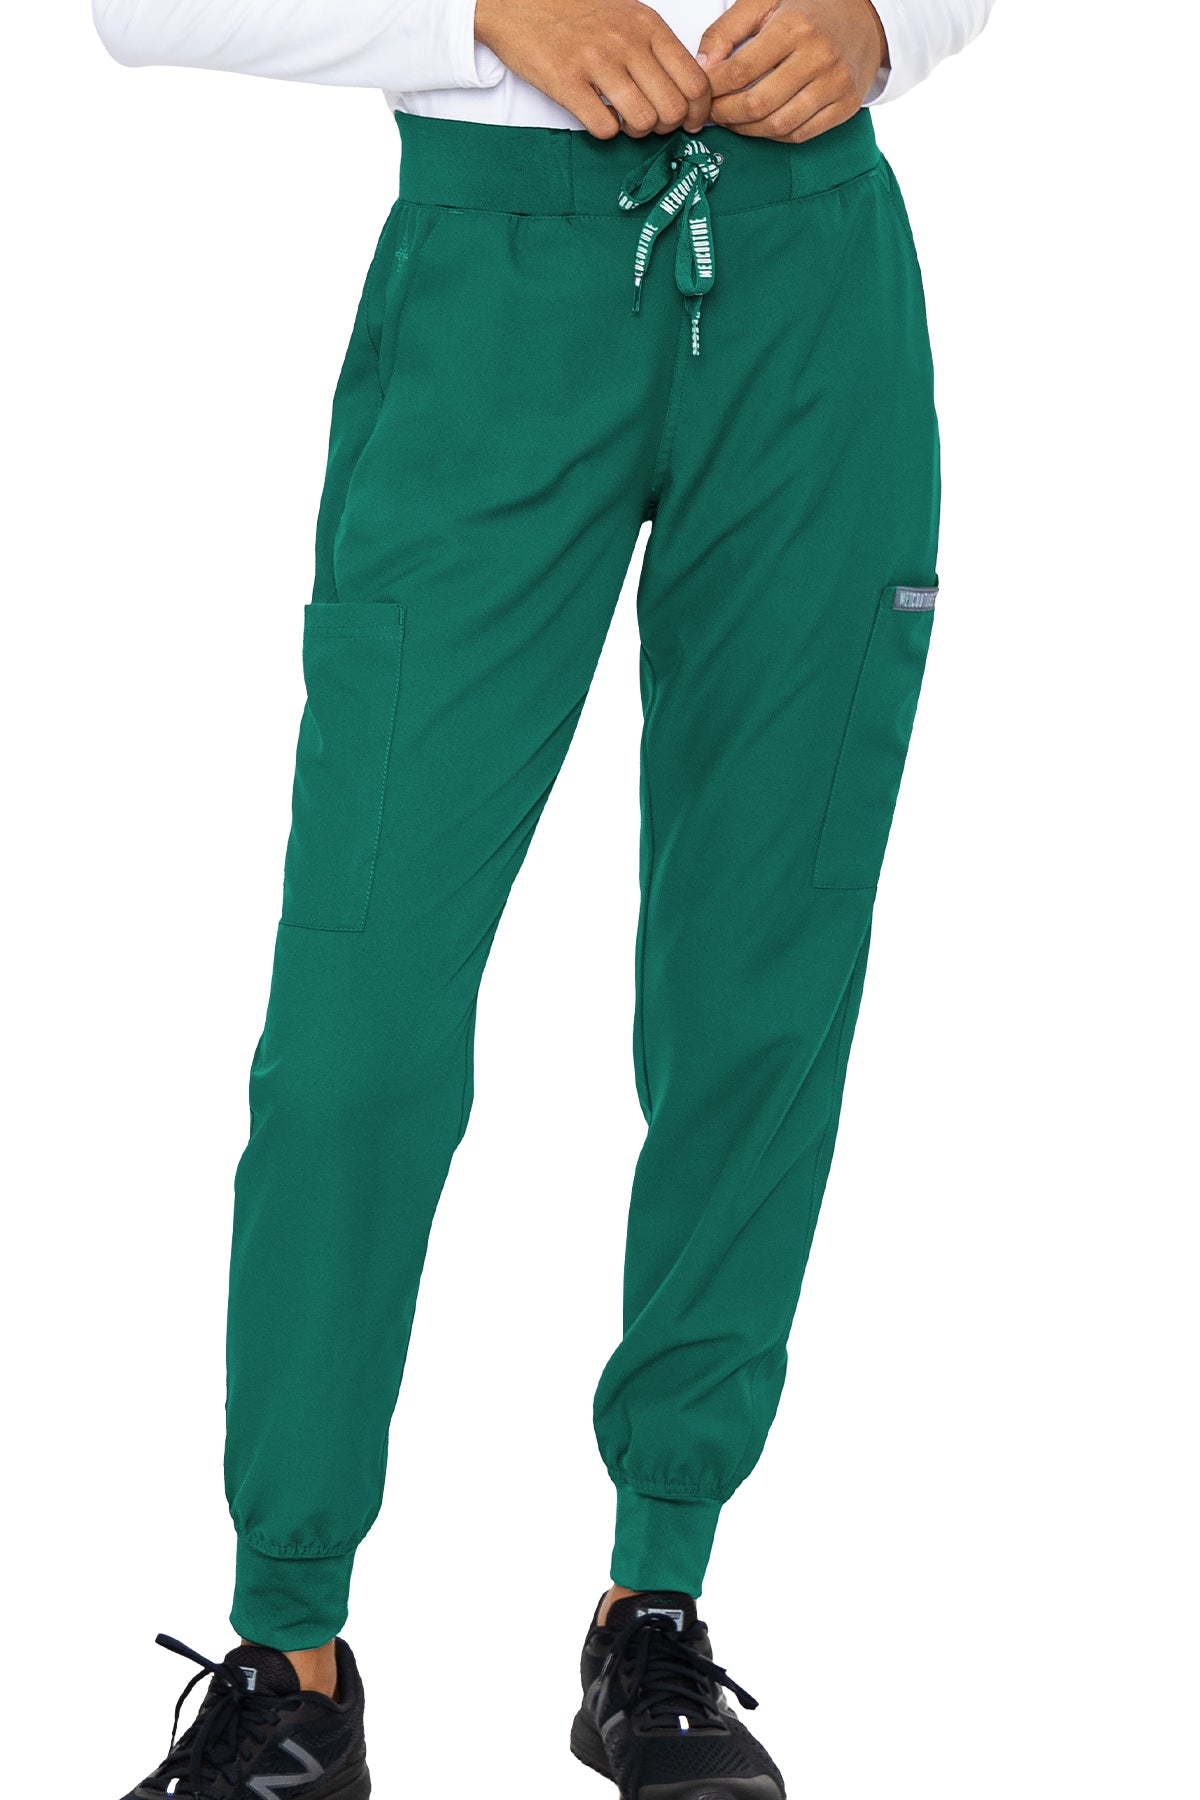 Med Couture Scrub Pants Insight Jogger Pant in Hunter at Parker's Clothing and Shoes.